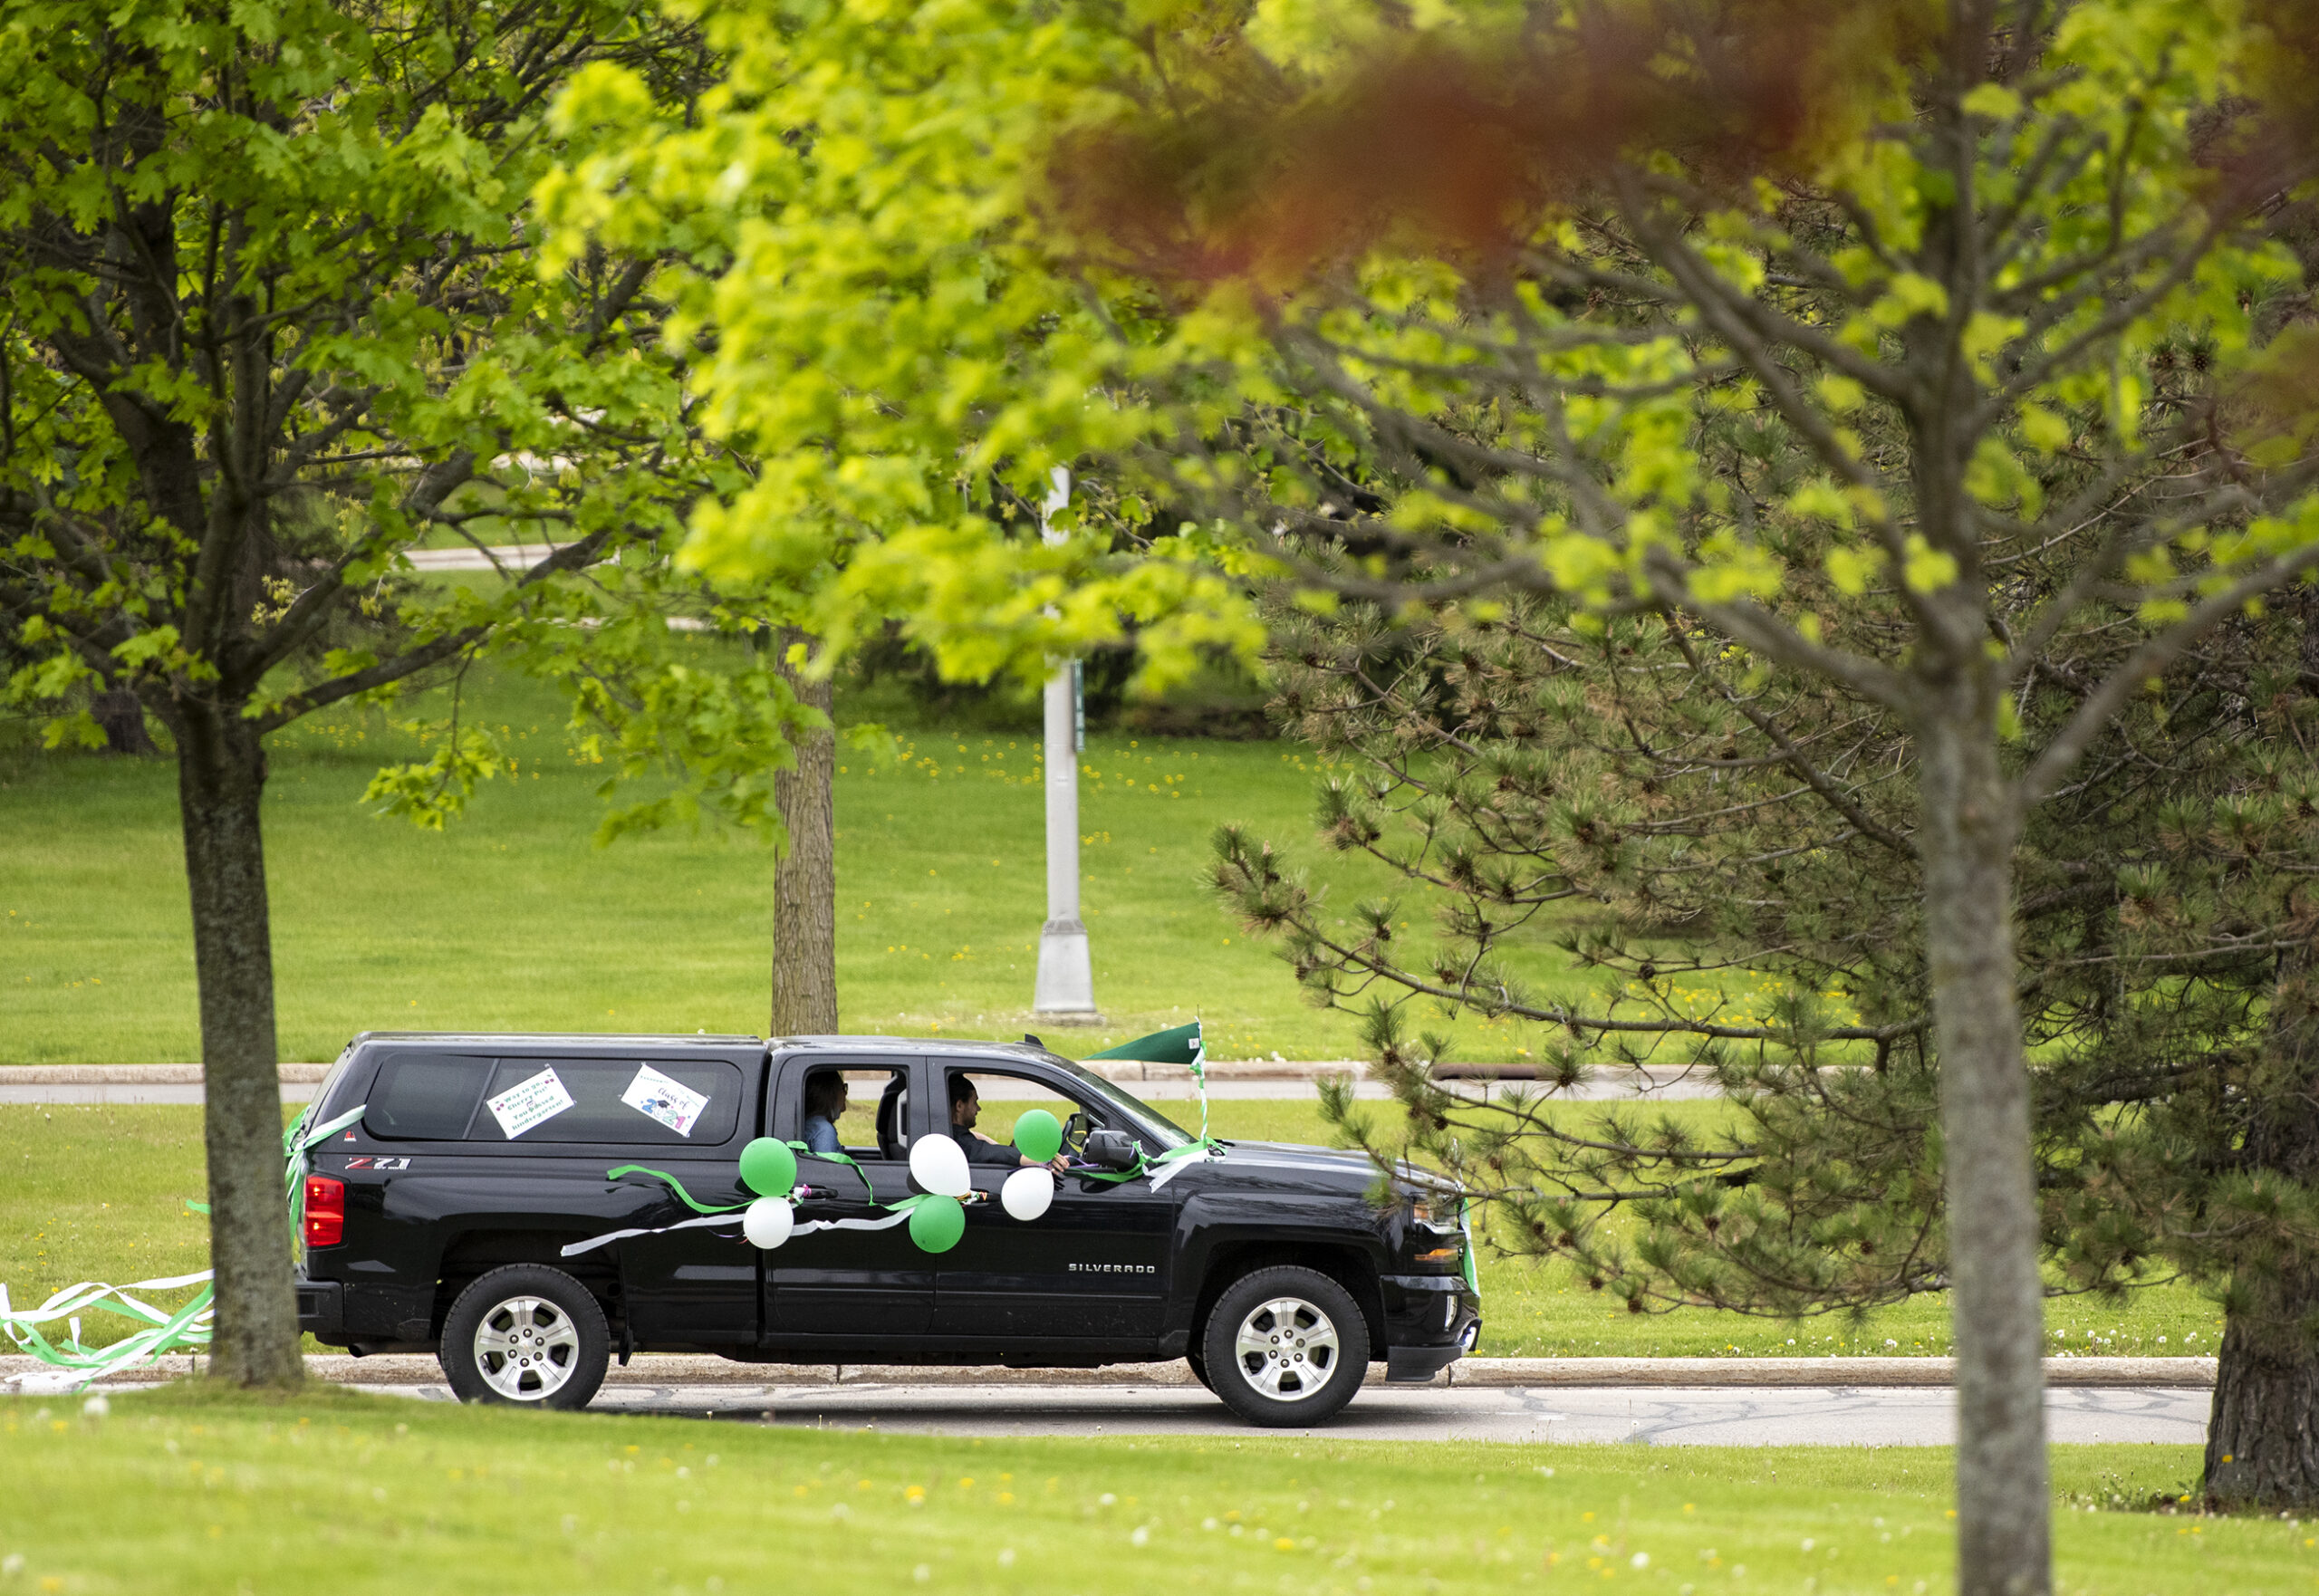 A black SUV with green and white balloons attached is seen in between green trees.